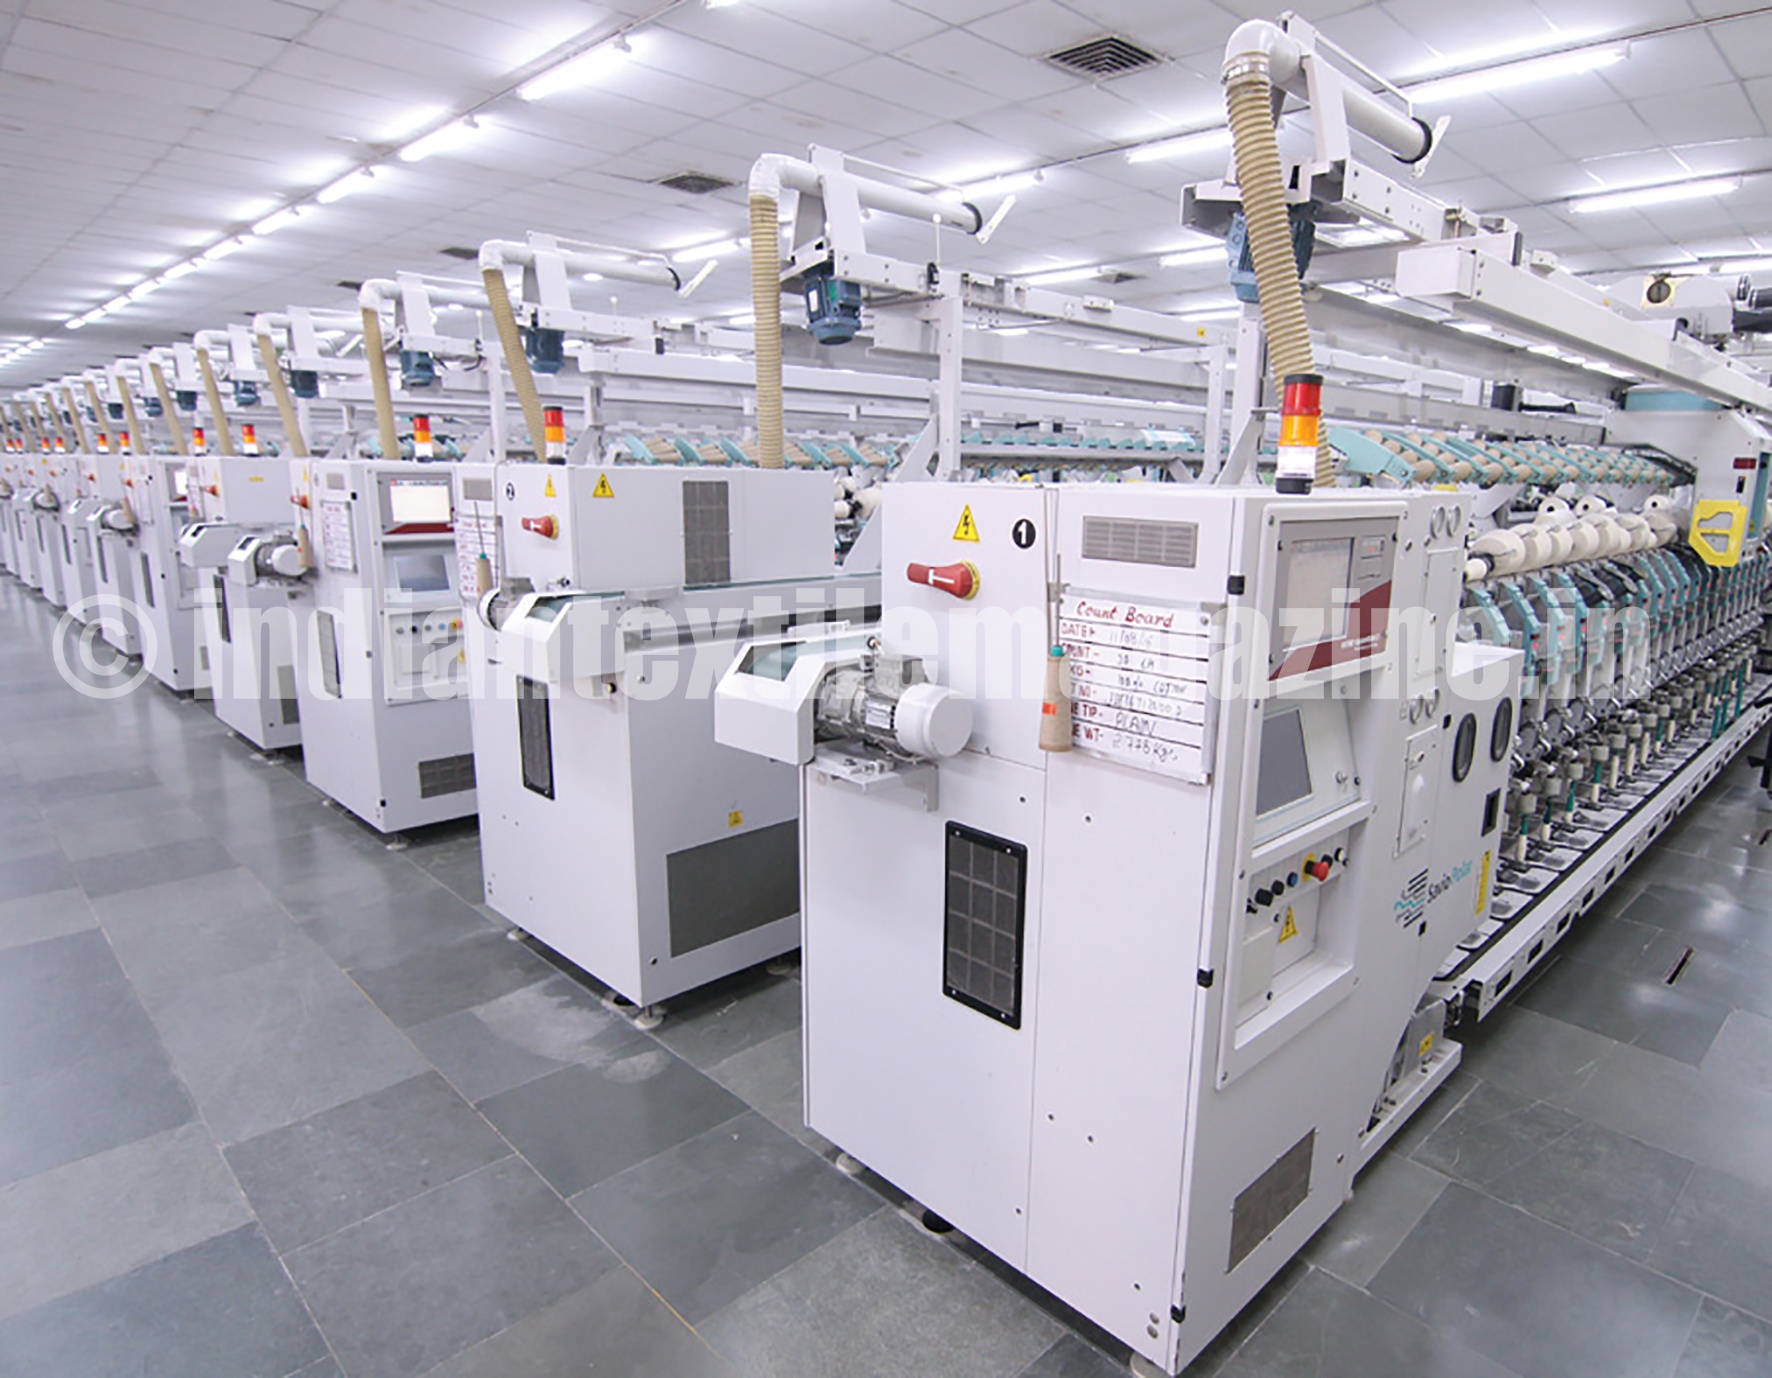 Focus on Indian Spinning Industry - KPR Mills - The Textile Magazine